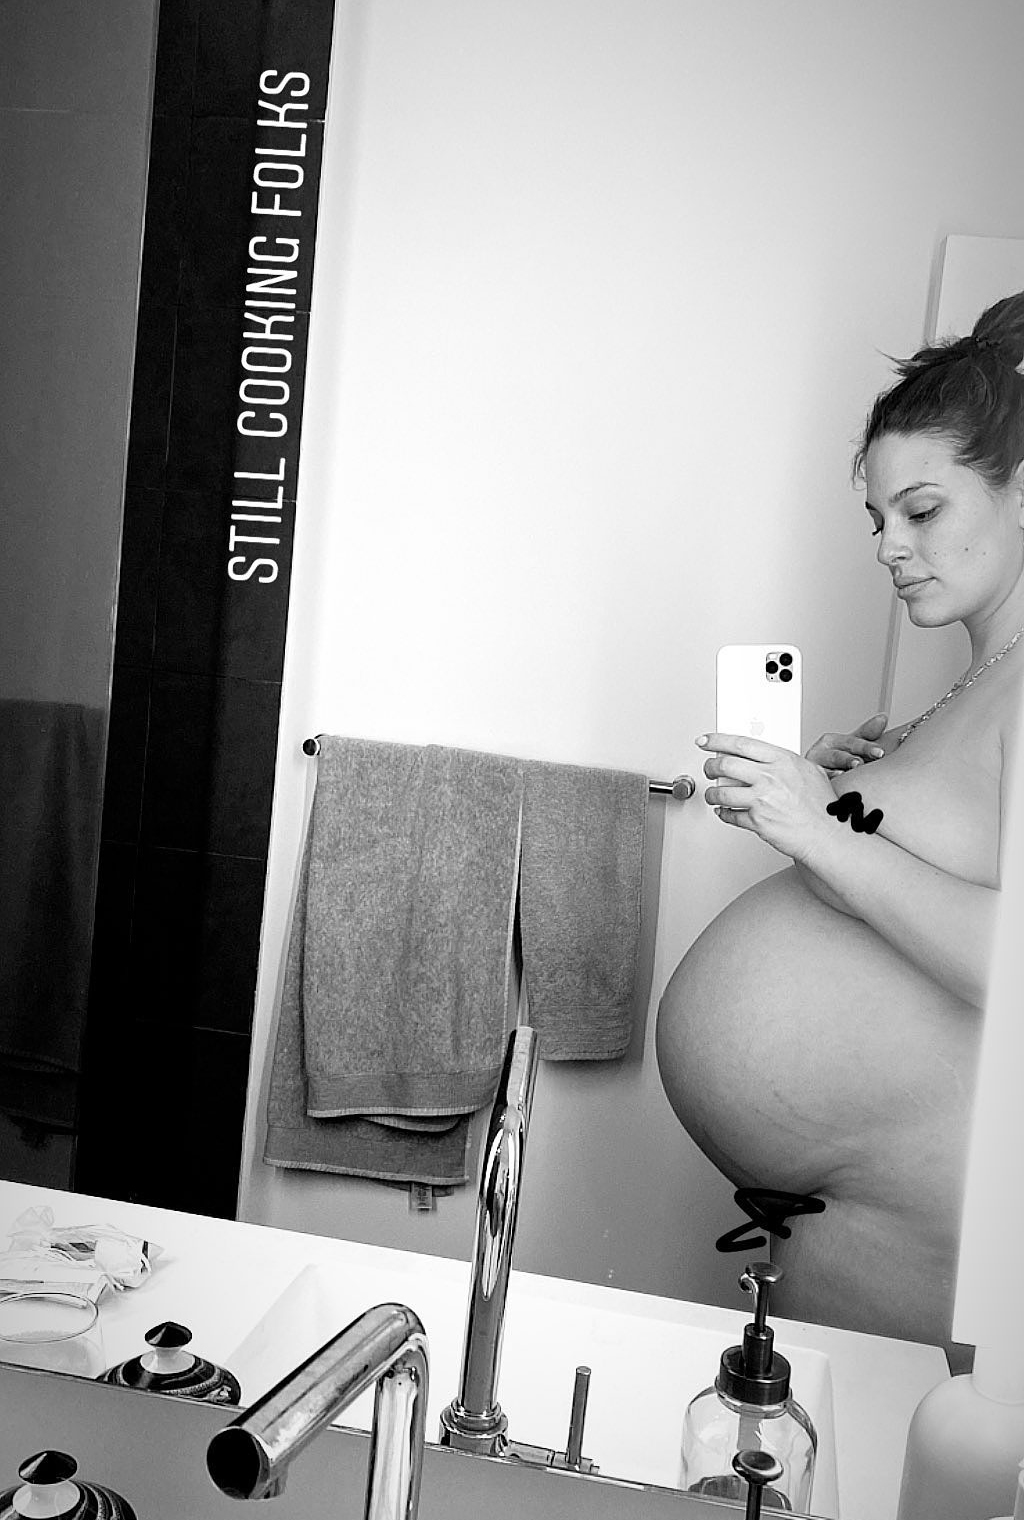 Pregnant Famous Porn Stars - Celebrities Posing Nude While Pregnant: Maternity Pics